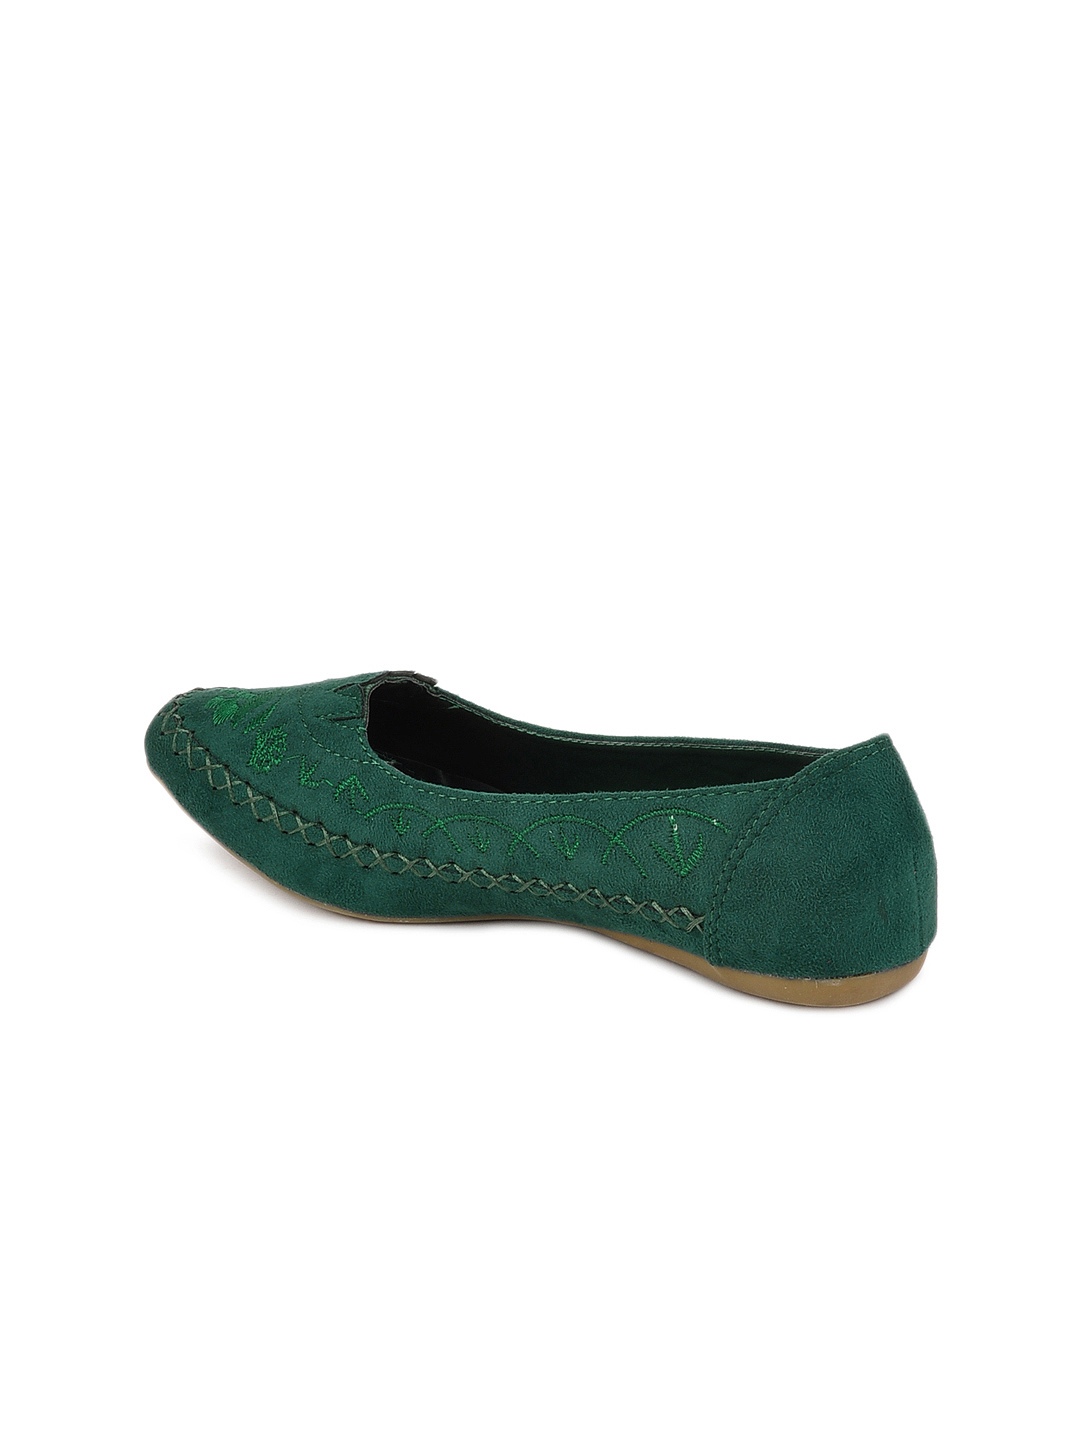 View Product Details More Flats by Jove More Green Flats More Flats